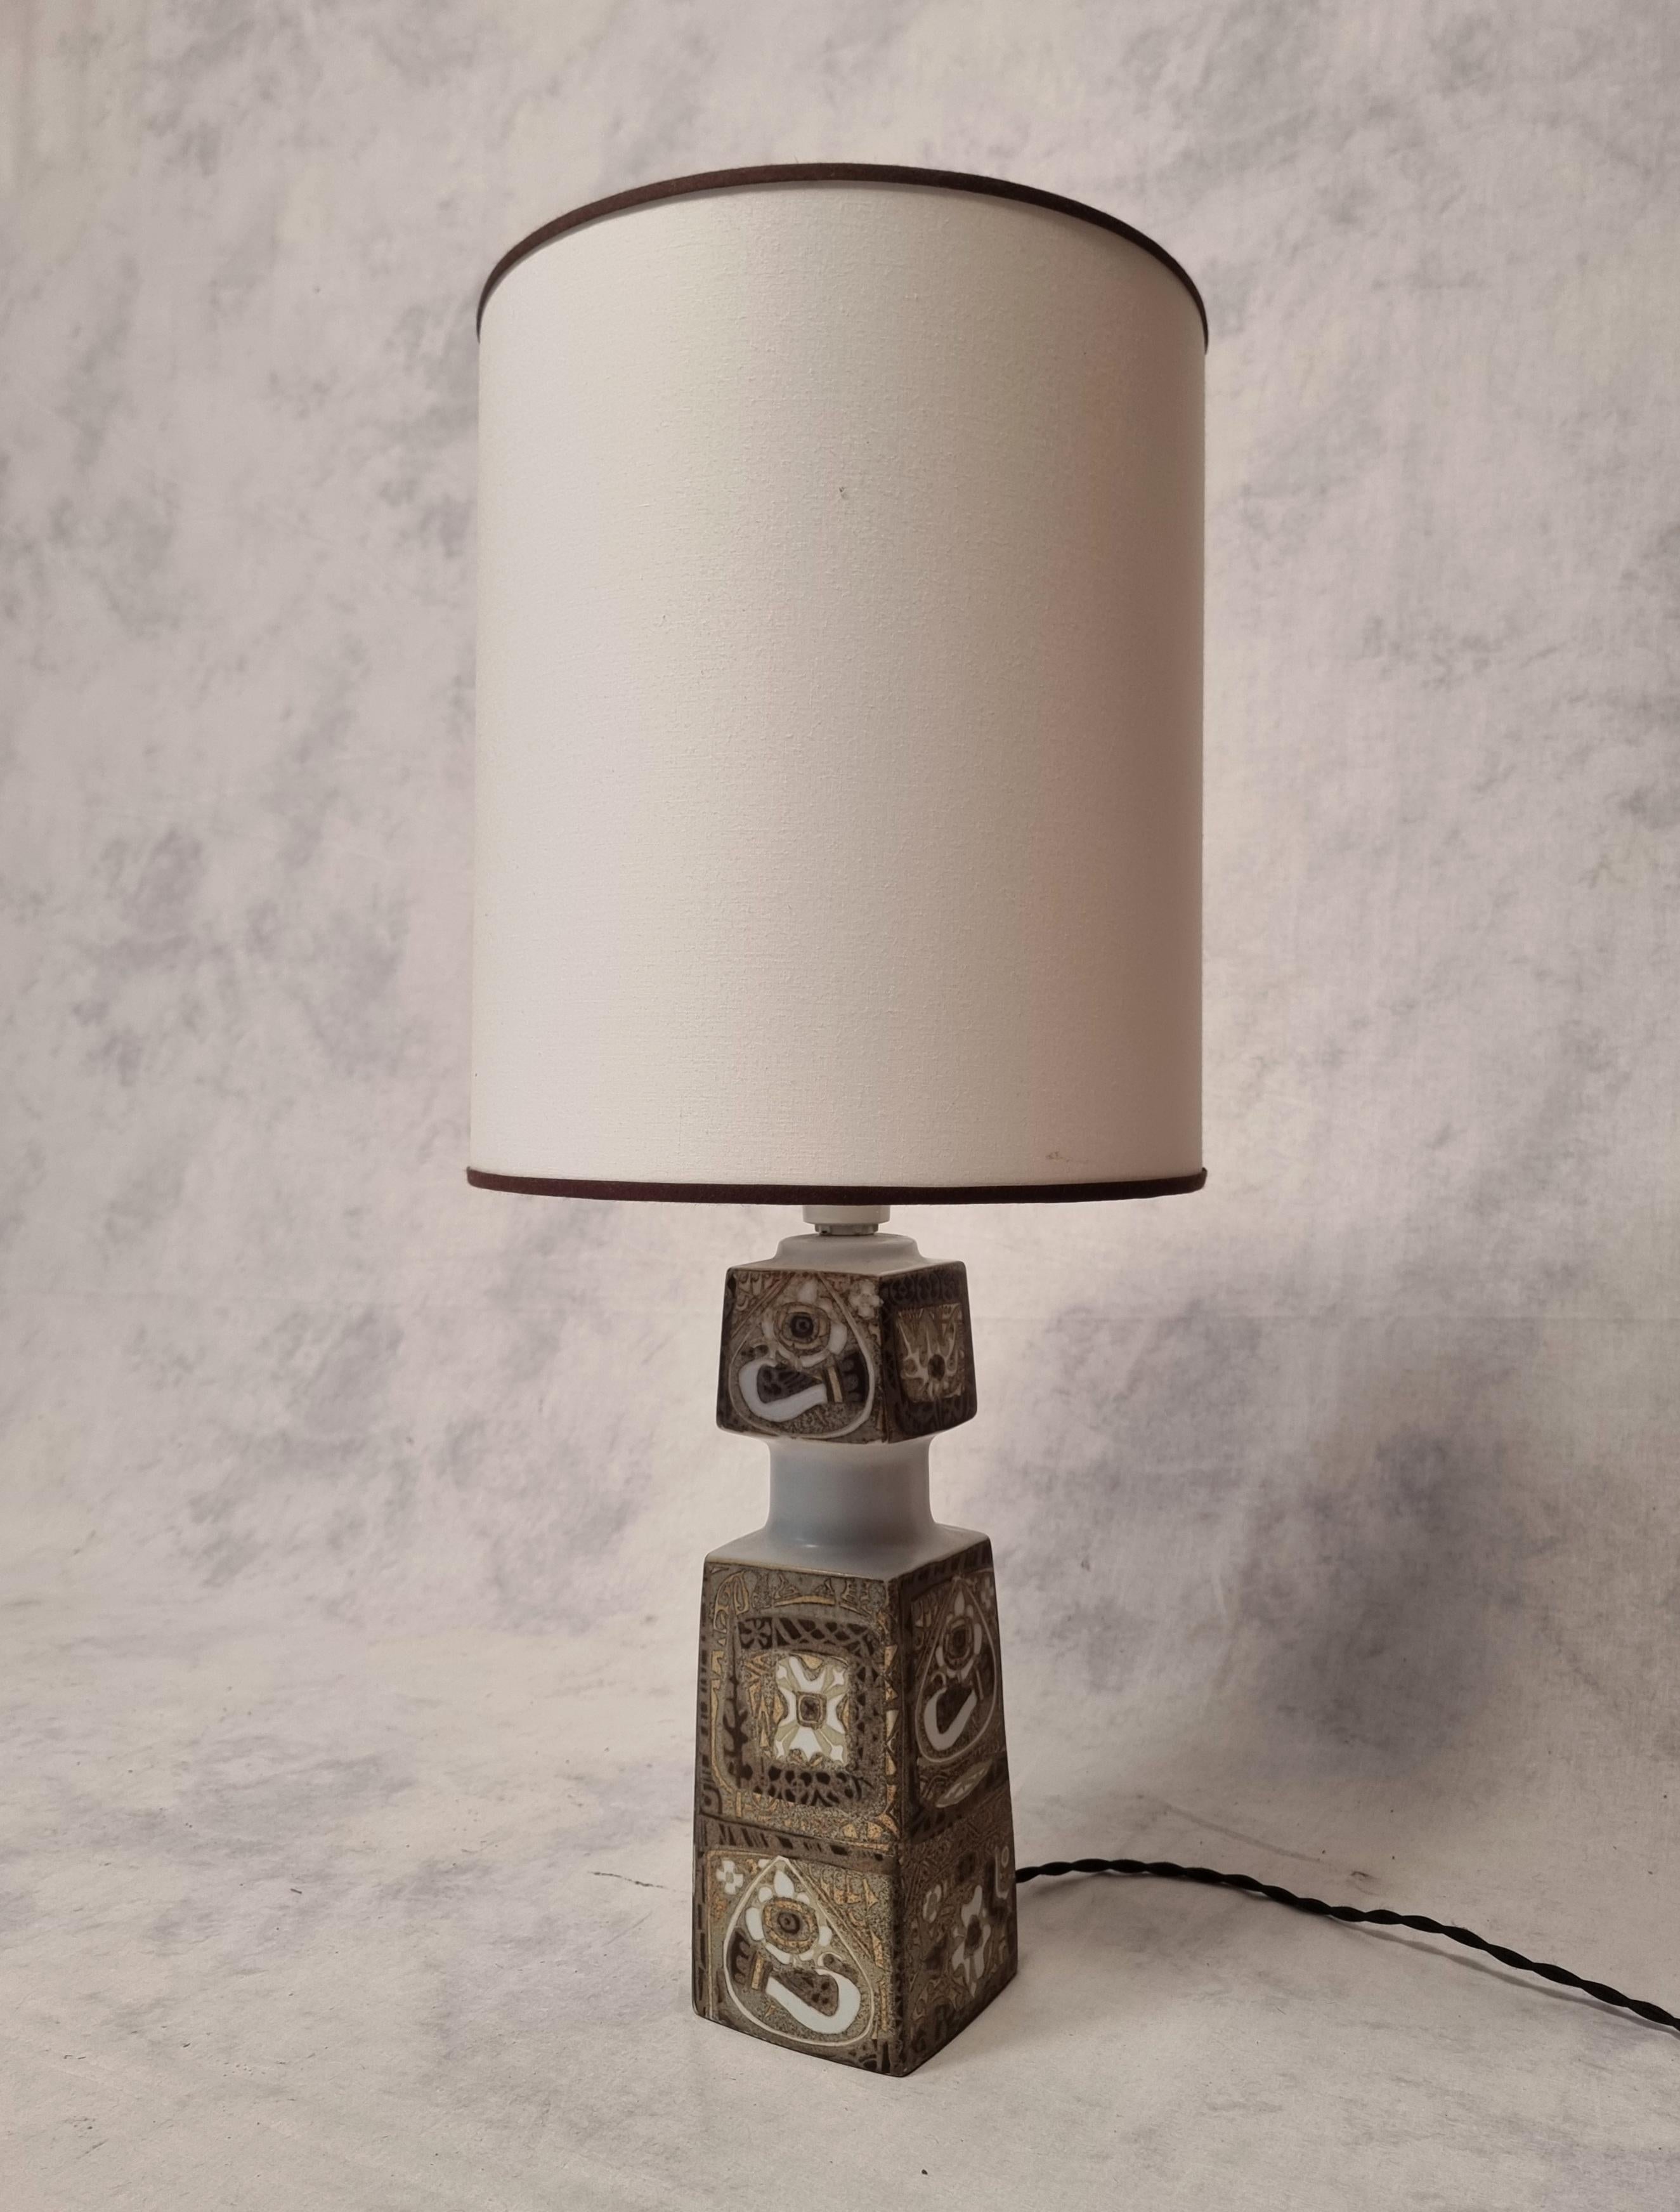 Vintage table lamp, desk lamp from Denmark. This lamp was designed by Nils Thorsson and produced by Fog & Morup in the 1960s. Nils Thorsson was then the chief designer at Royal Copenhagen for the BACA series. The decorations are placed on a